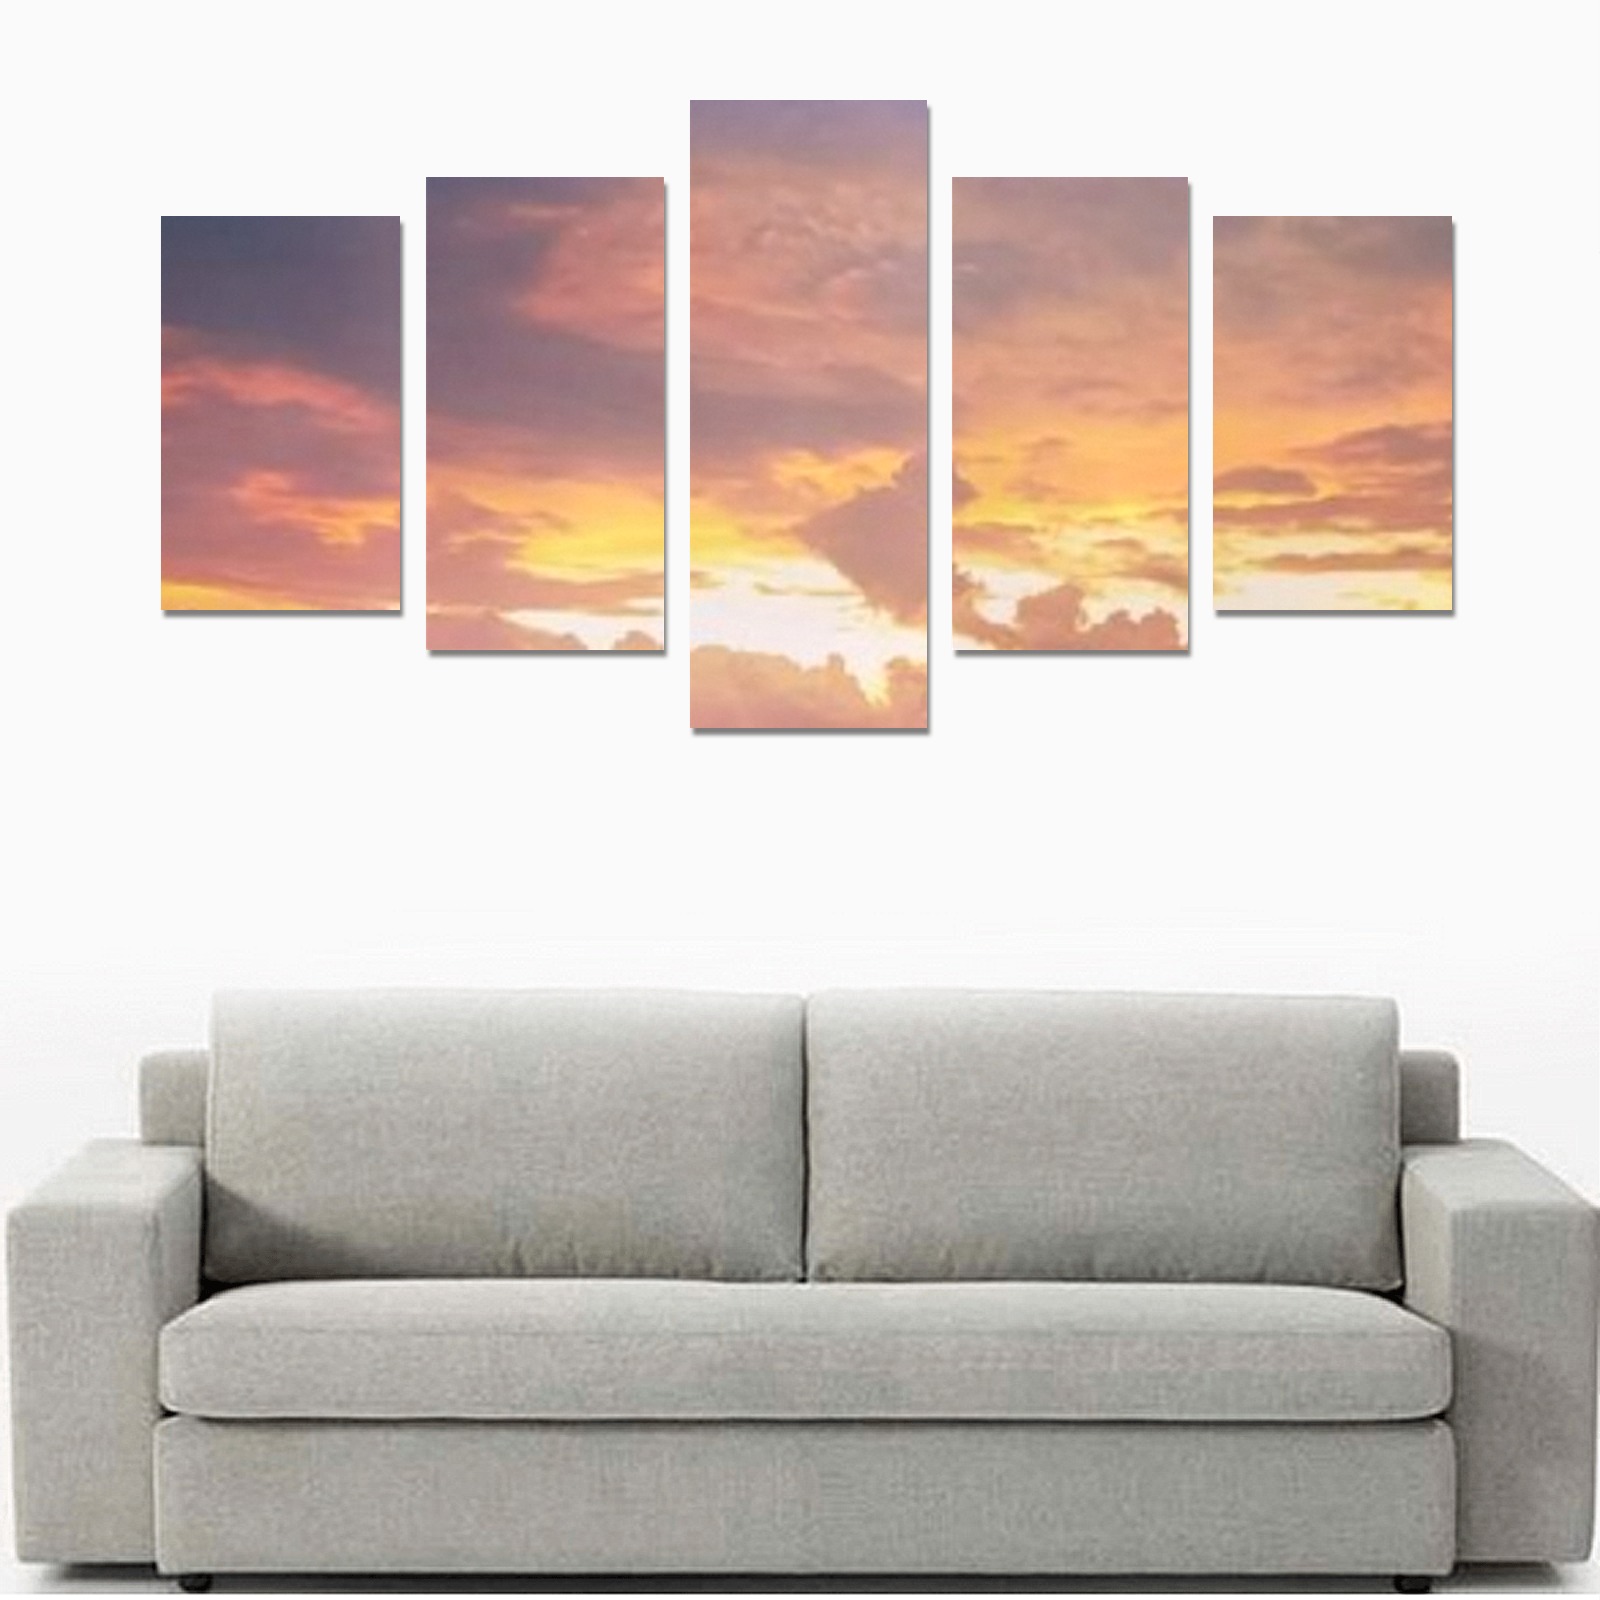 Sunset with red, black clouds Canvas Print Sets C (No Frame)